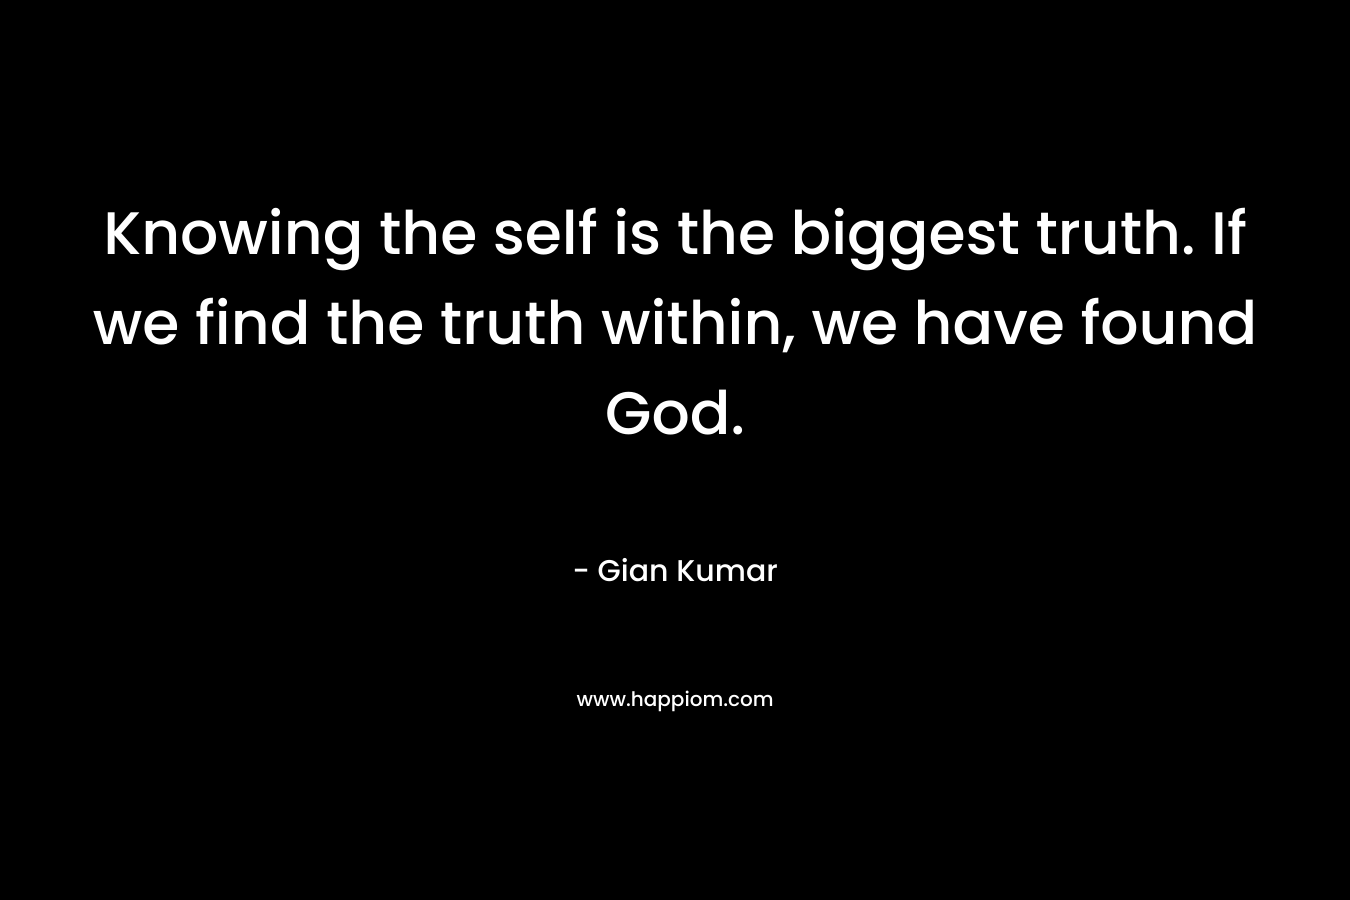 Knowing the self is the biggest truth. If we find the truth within, we have found God.